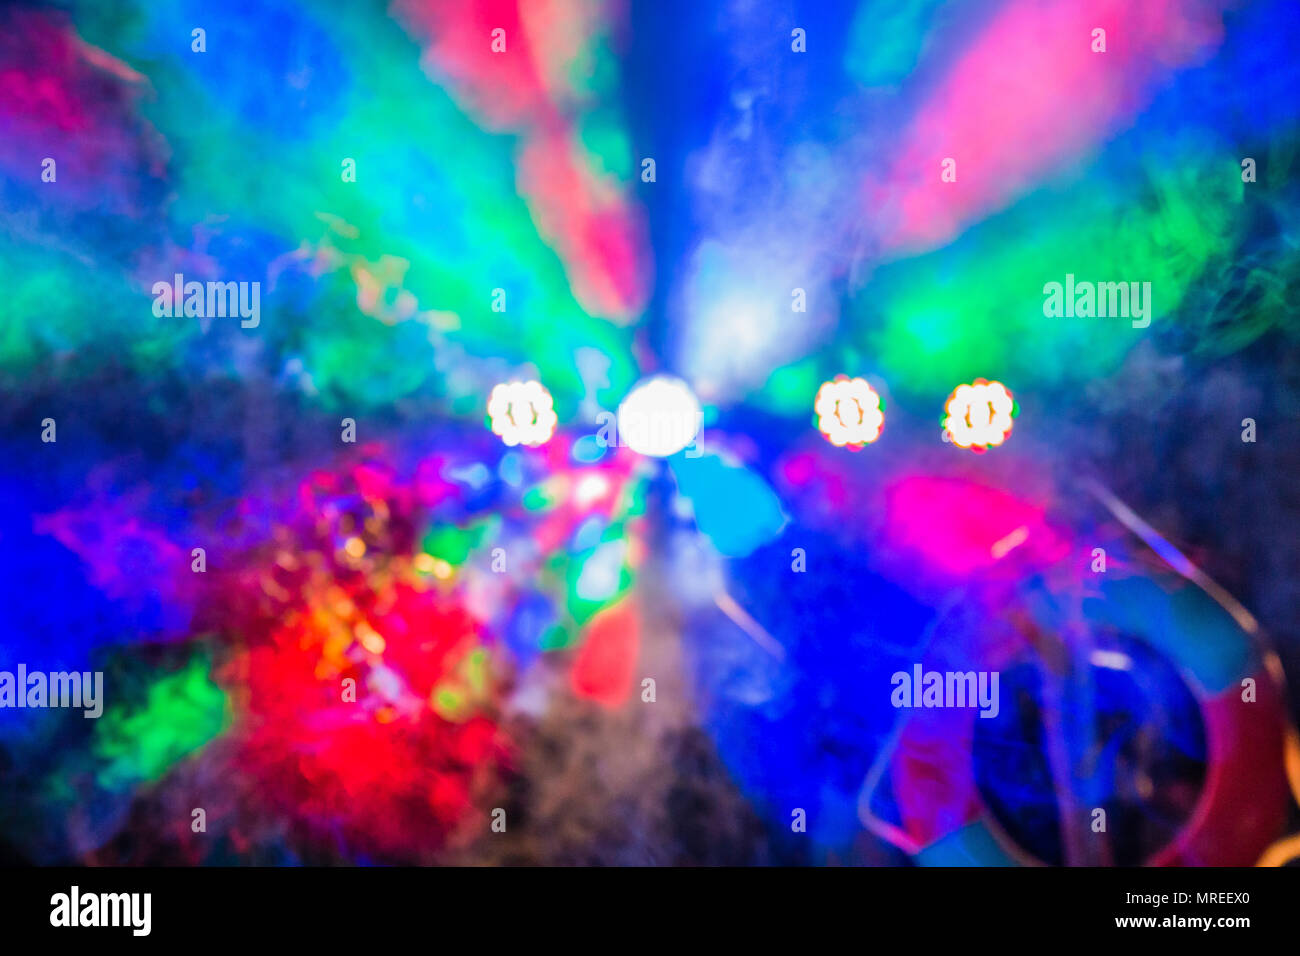 Abstract blurred bokeh party lights Stock Photo - Alamy